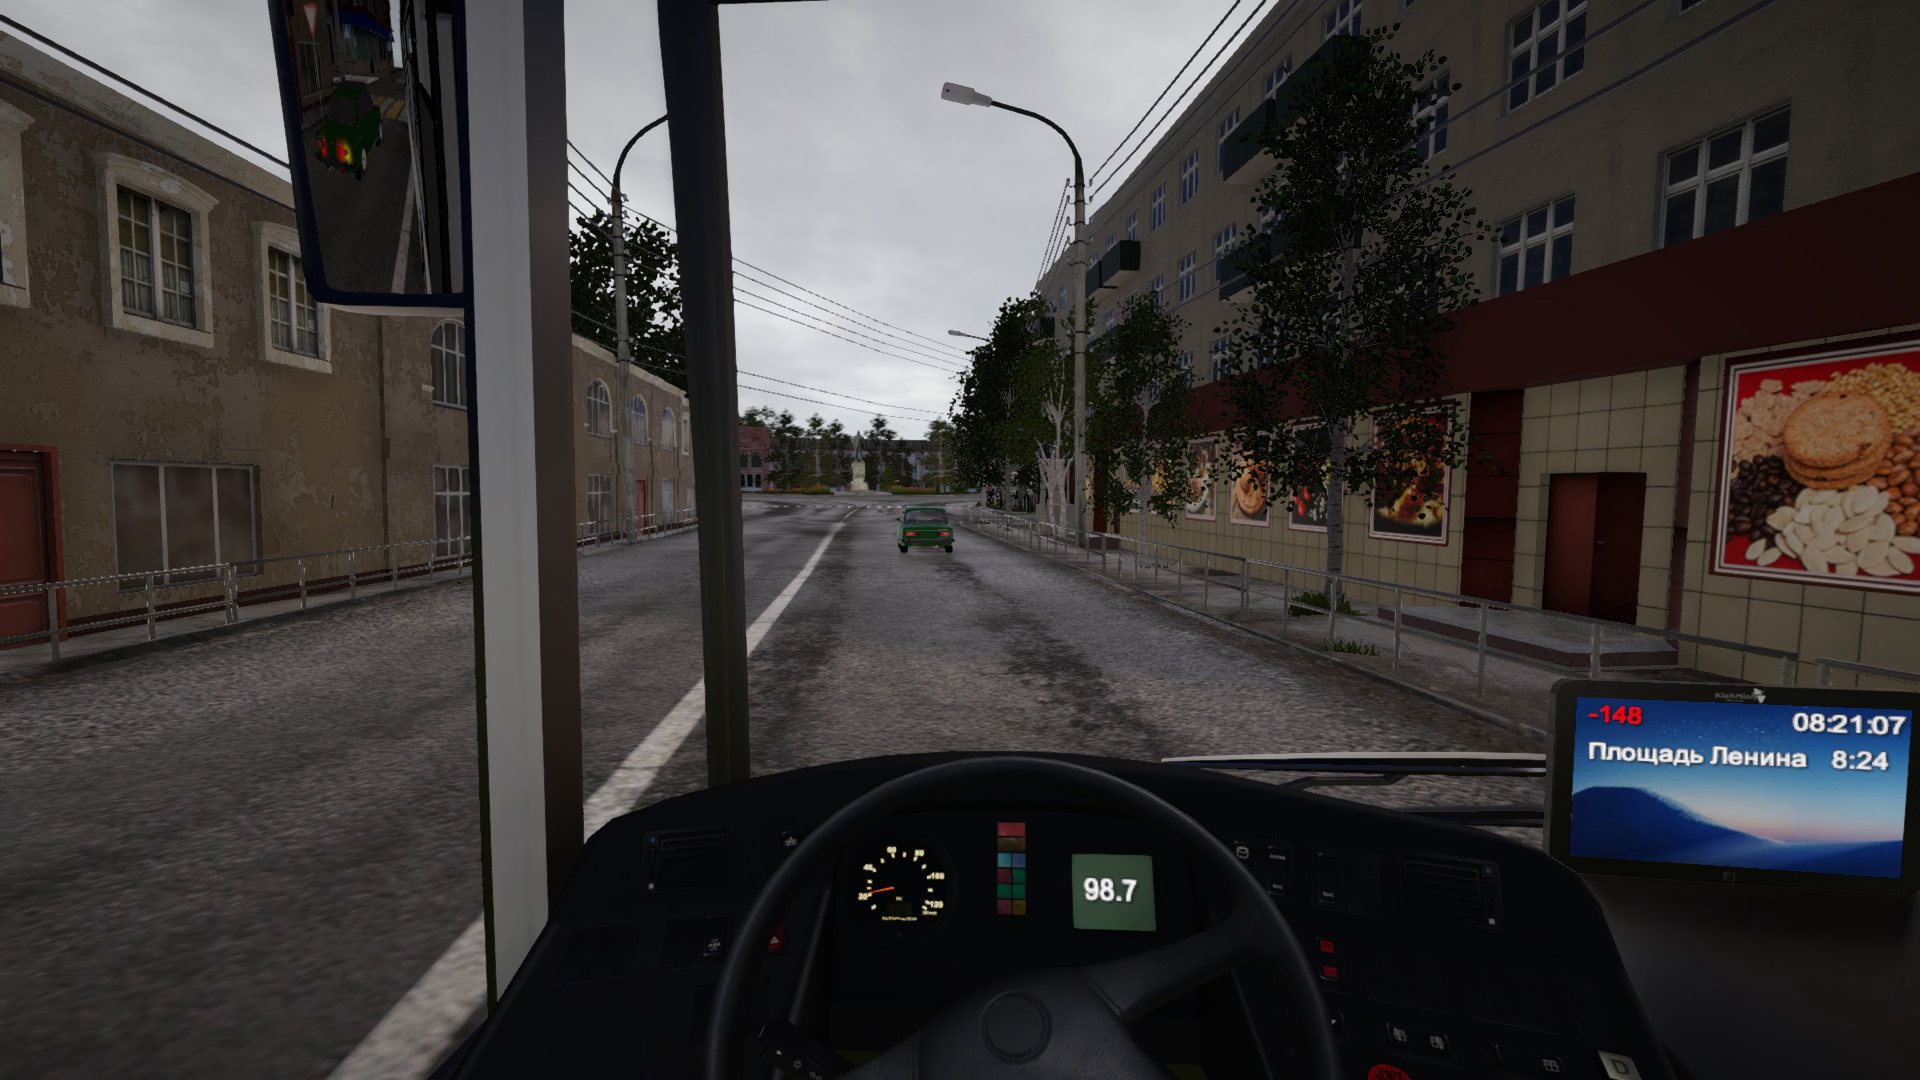 download the new version for windows Bus Driver Simulator 2023